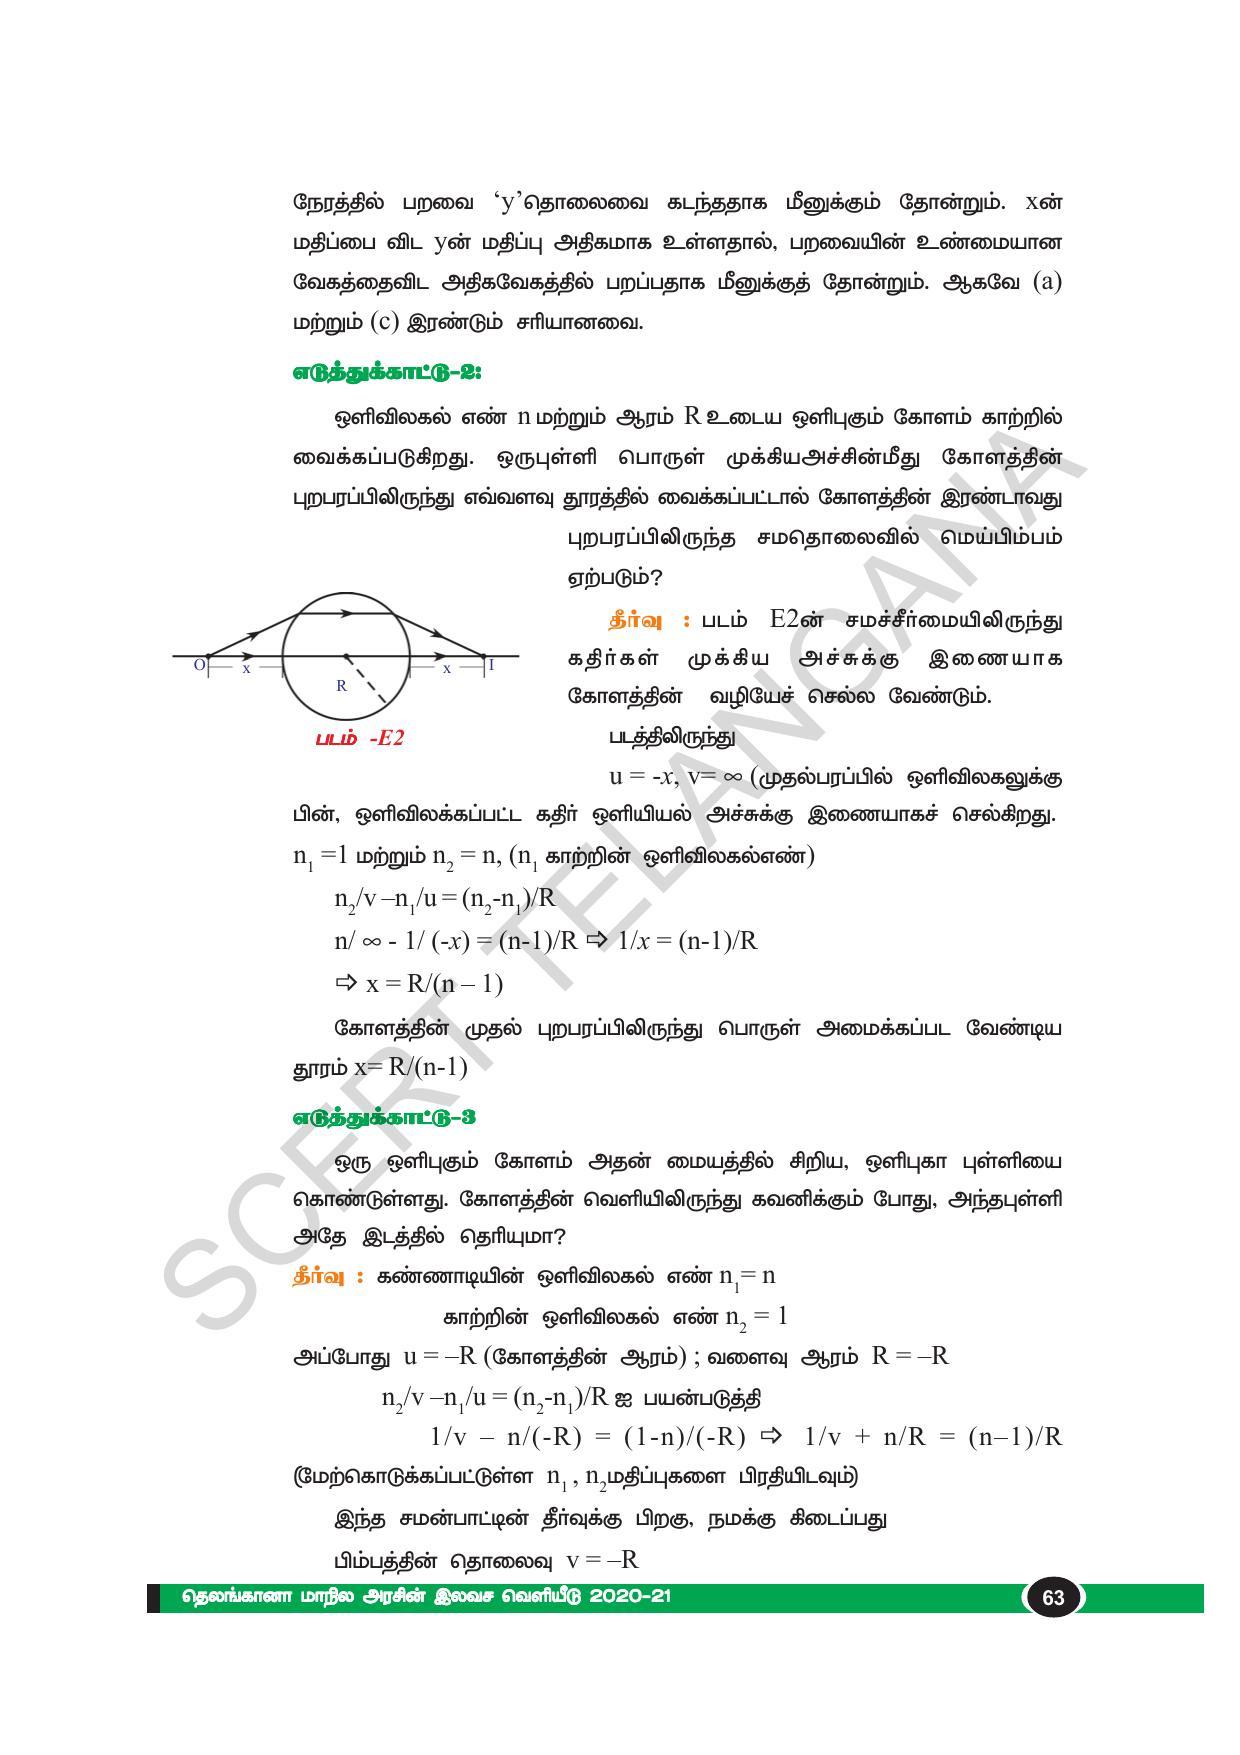 TS SCERT Class 10 Physical Science(Tamil Medium) Text Book - Page 75